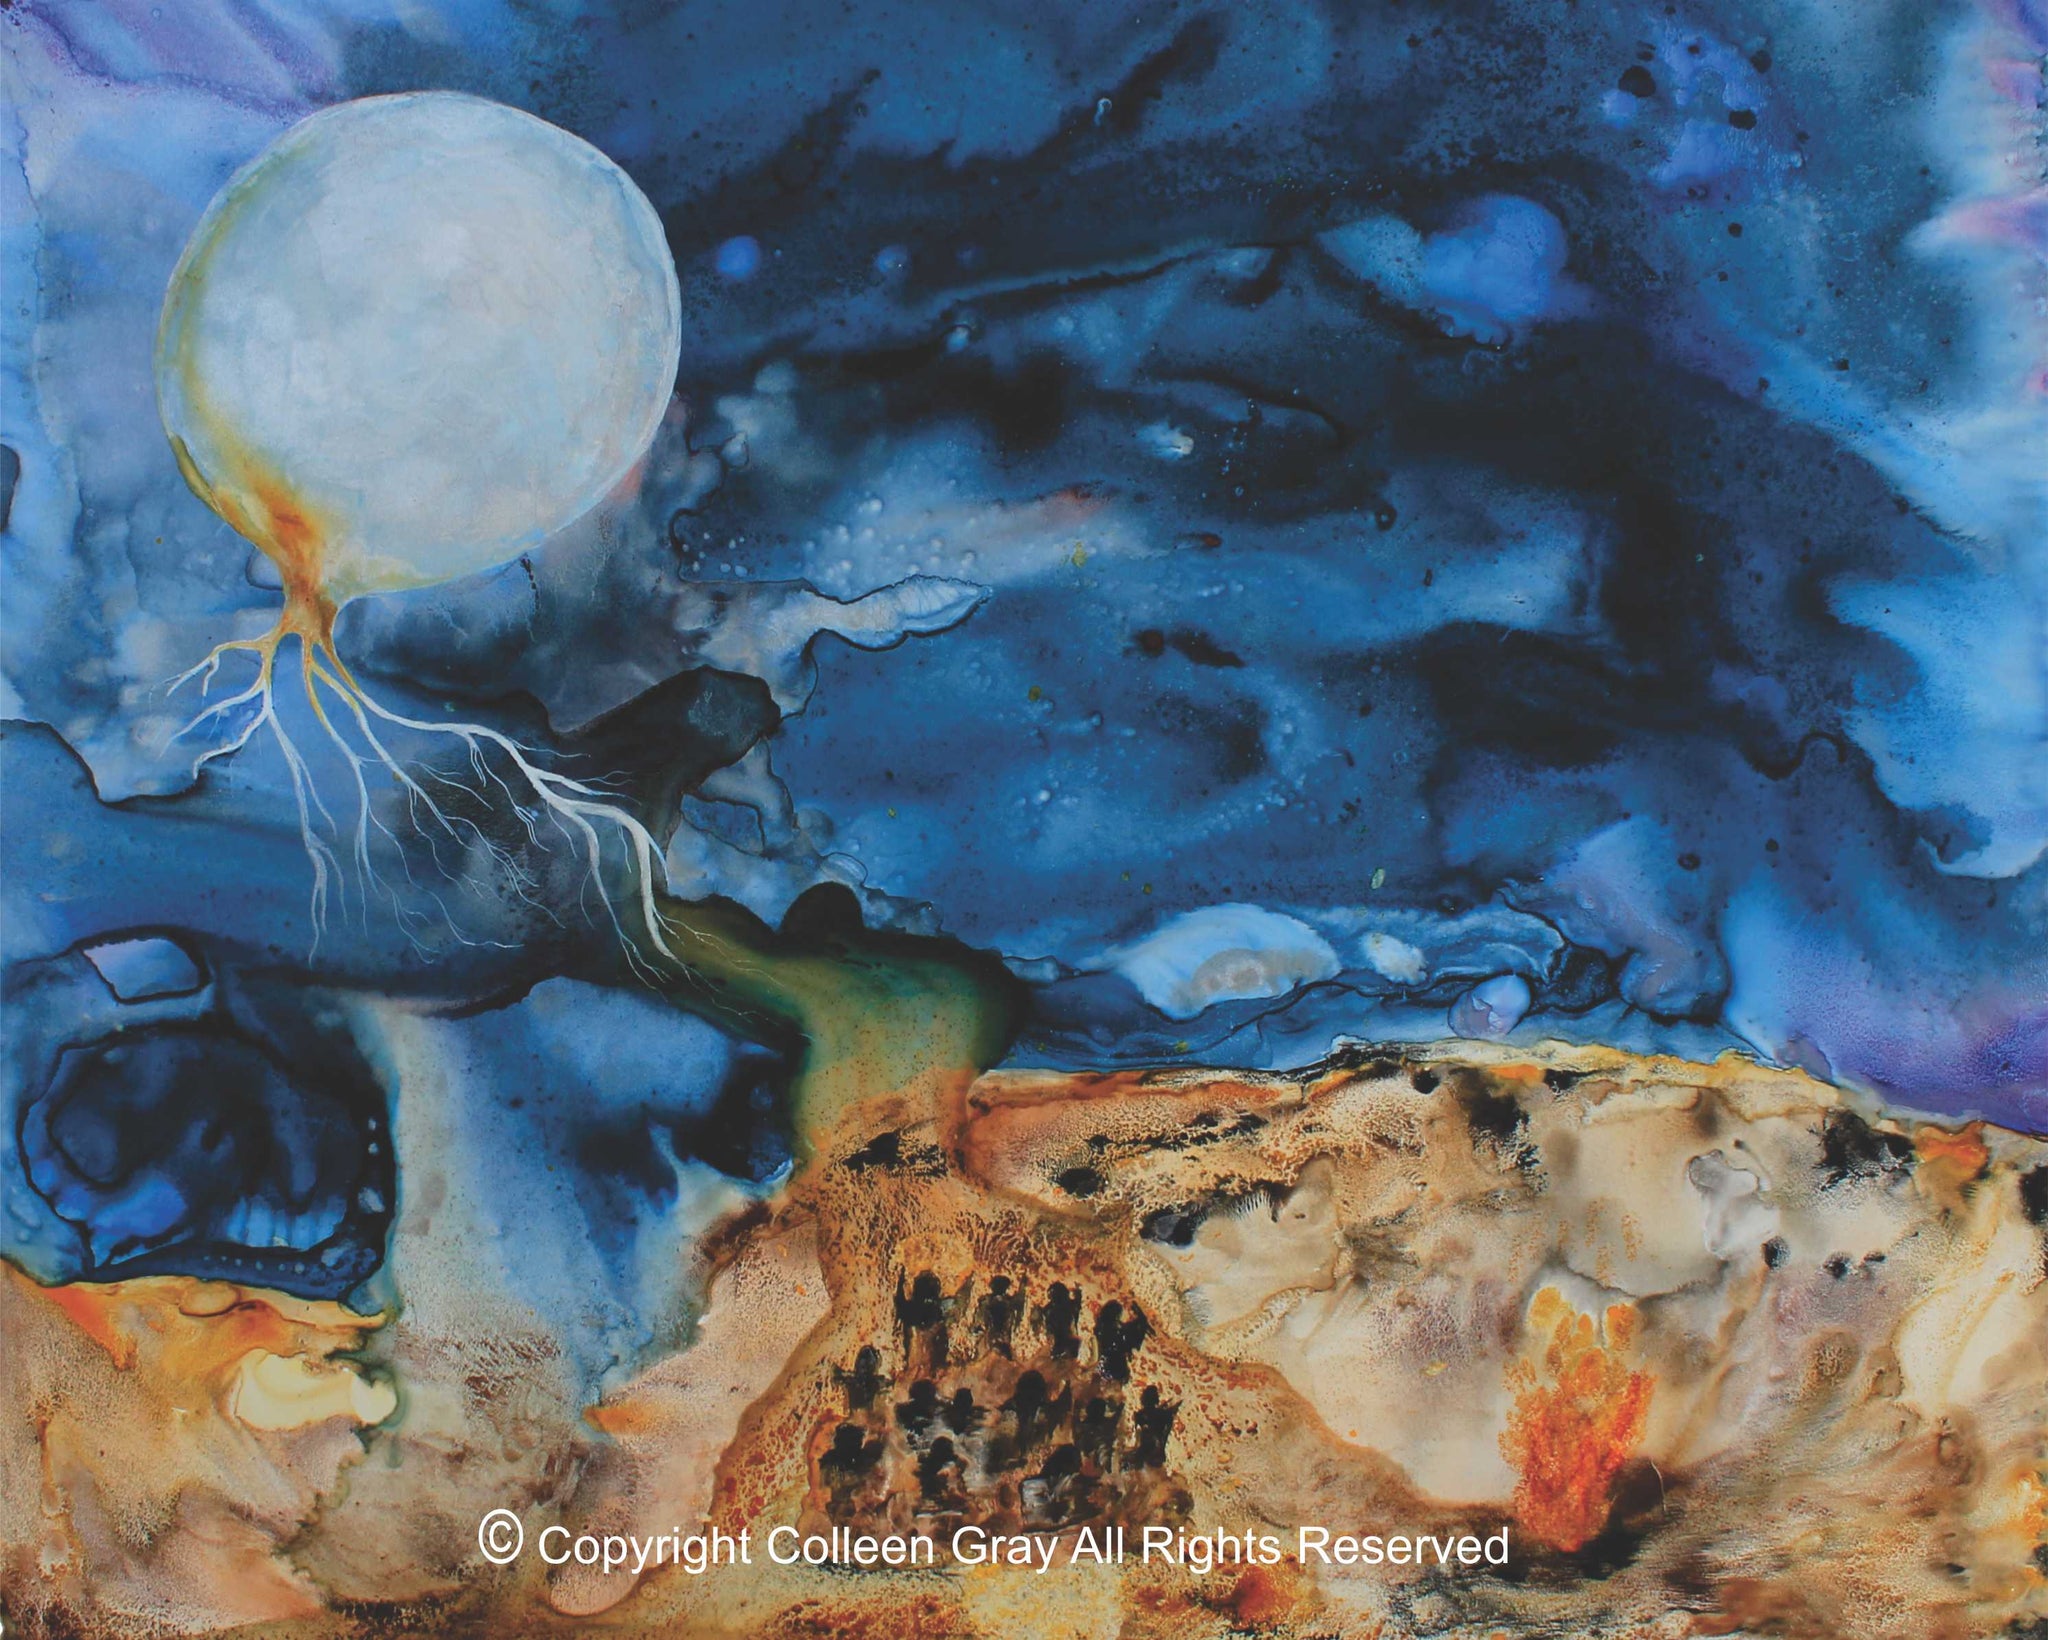 Image Title: Tatanka Wakan - Art Card by Metis Artist Colleen Gray Indigenous Canadian Art Work. Image of Full moon in vibrant blue sky with 13 grandmothers gathered below sturgeon moon. For sale at https://artforaidshop.ca